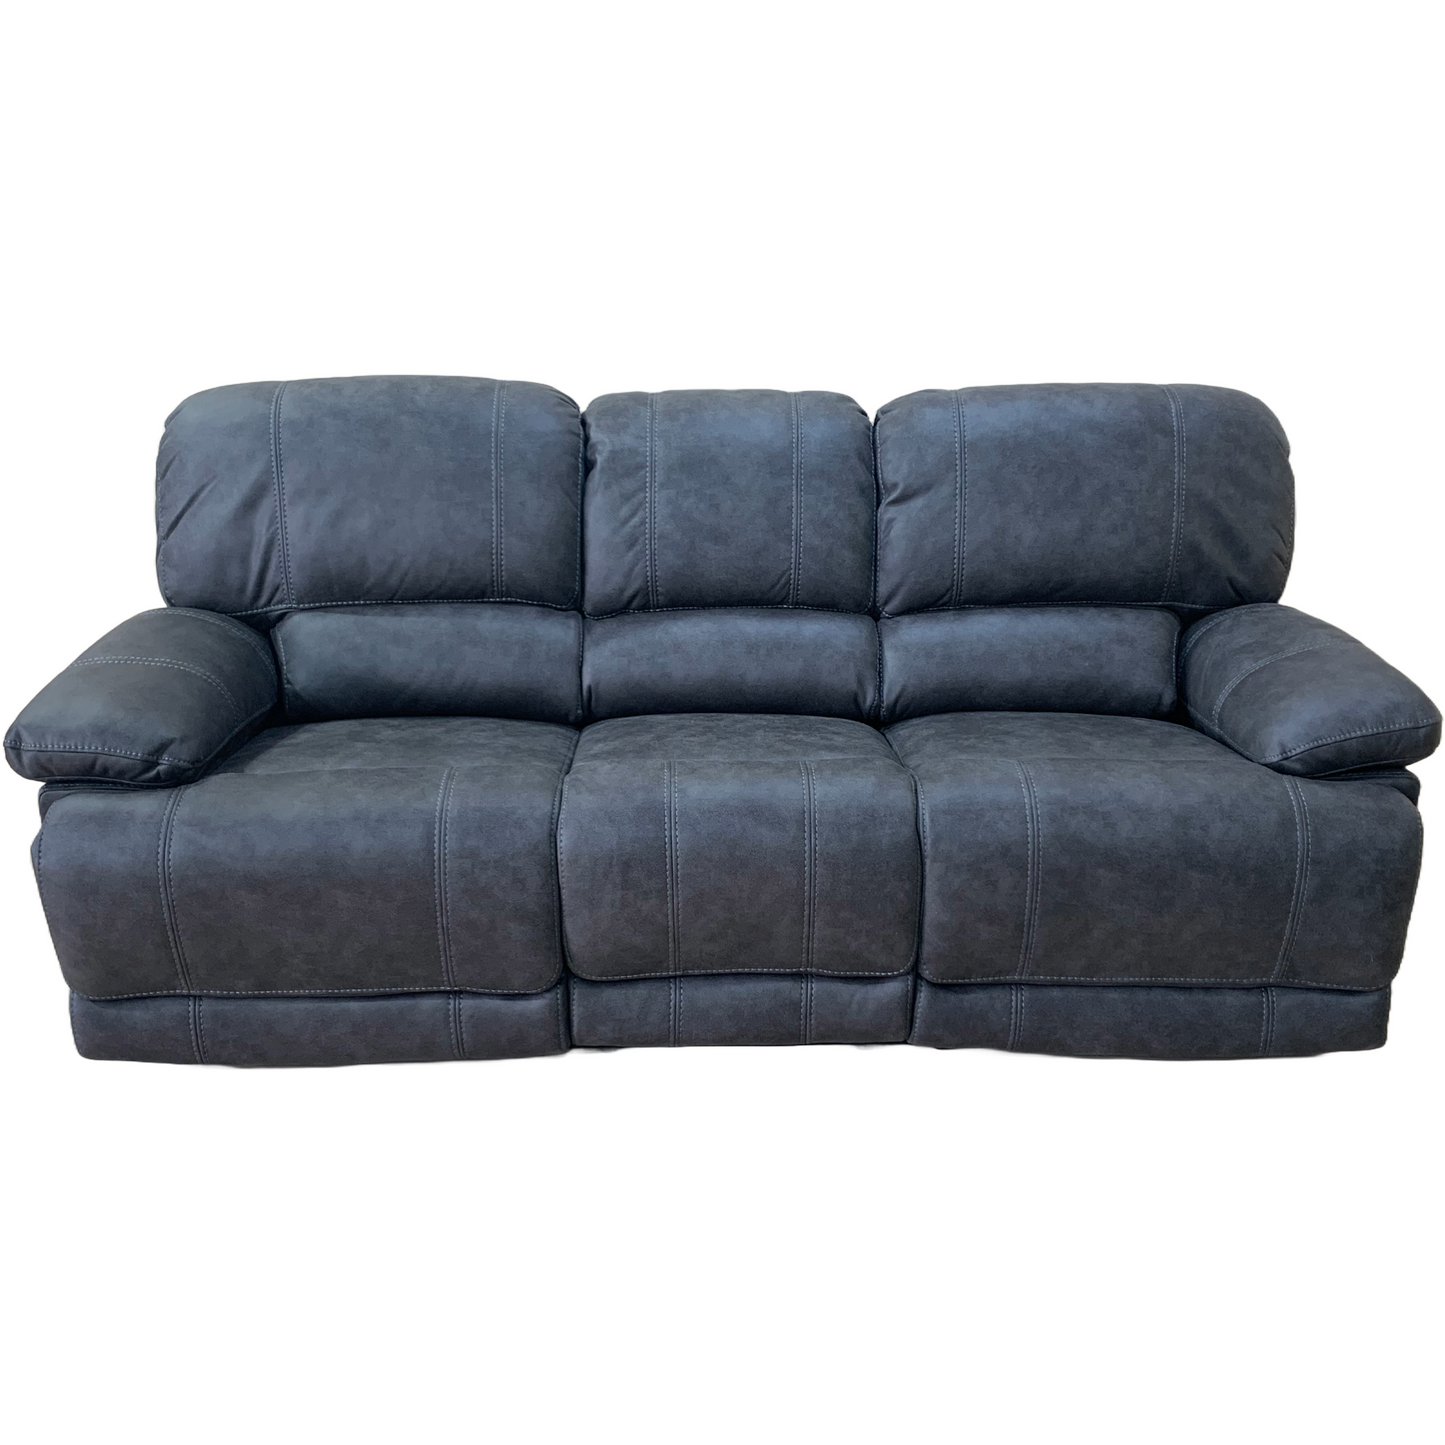 Manchester Lounge Suite - Grey